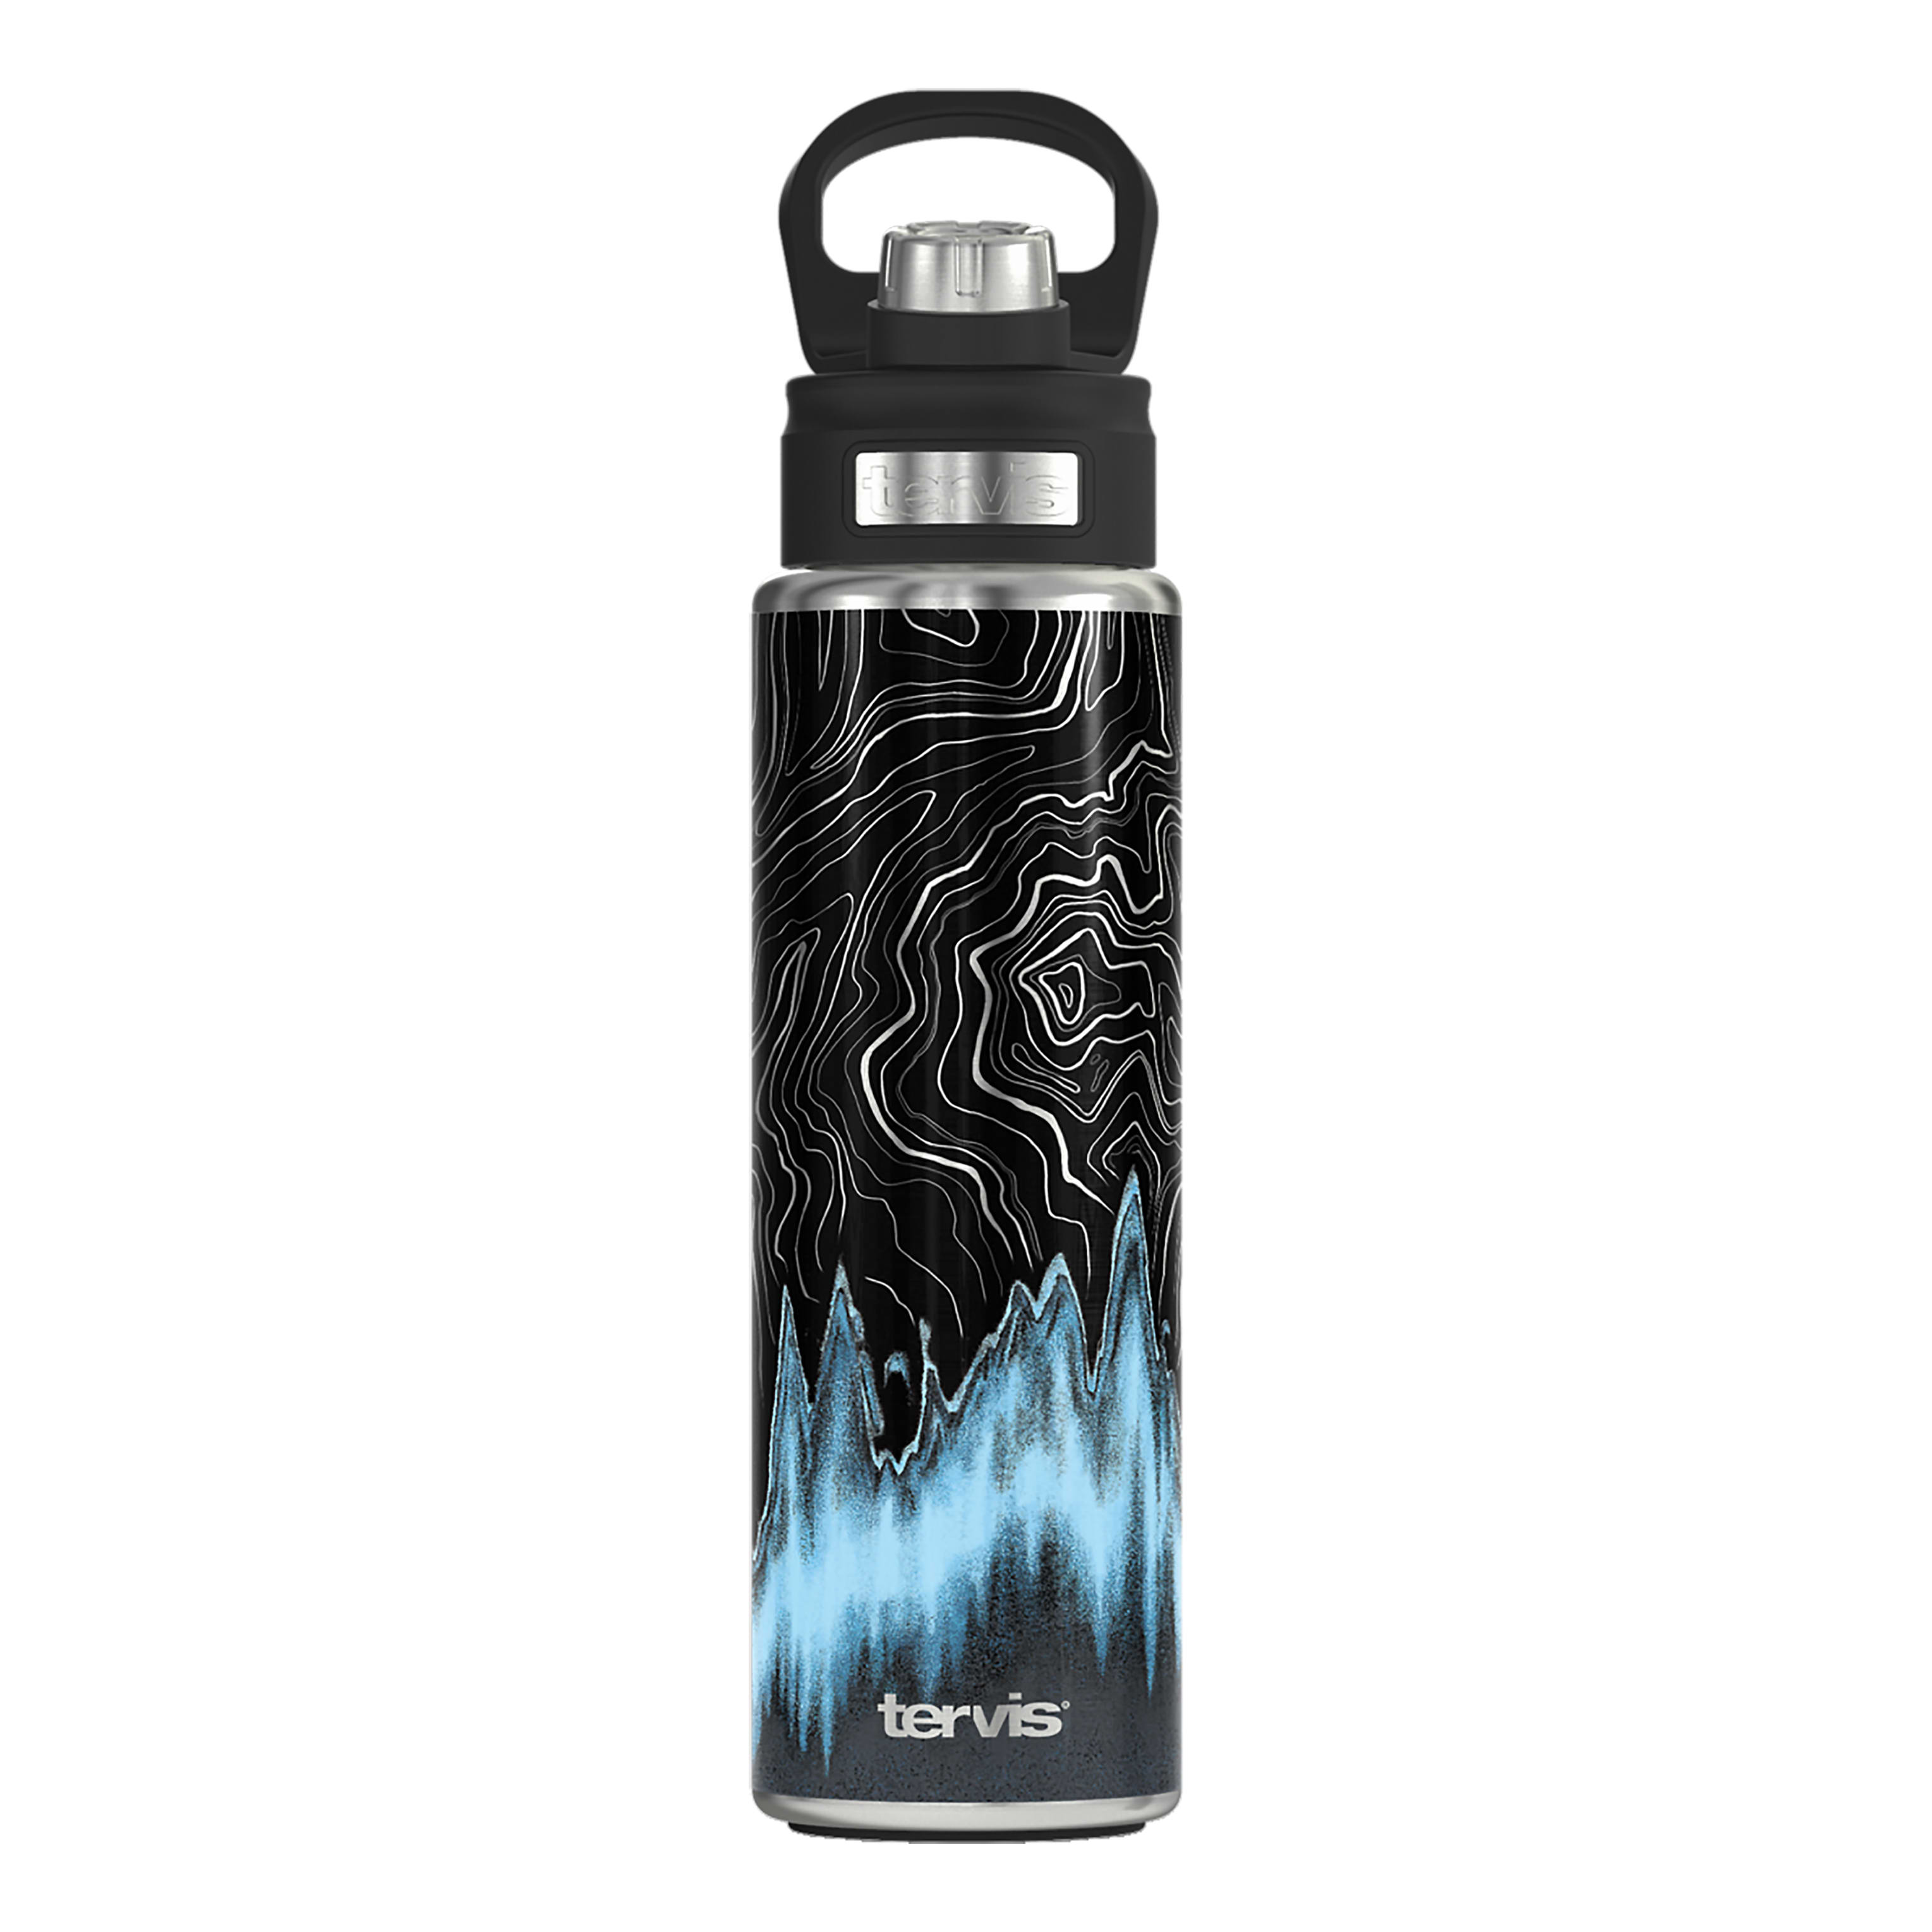 Tervis 24 oz. Wide Mouth Stainless Steel Water Bottle - Topograph Radar